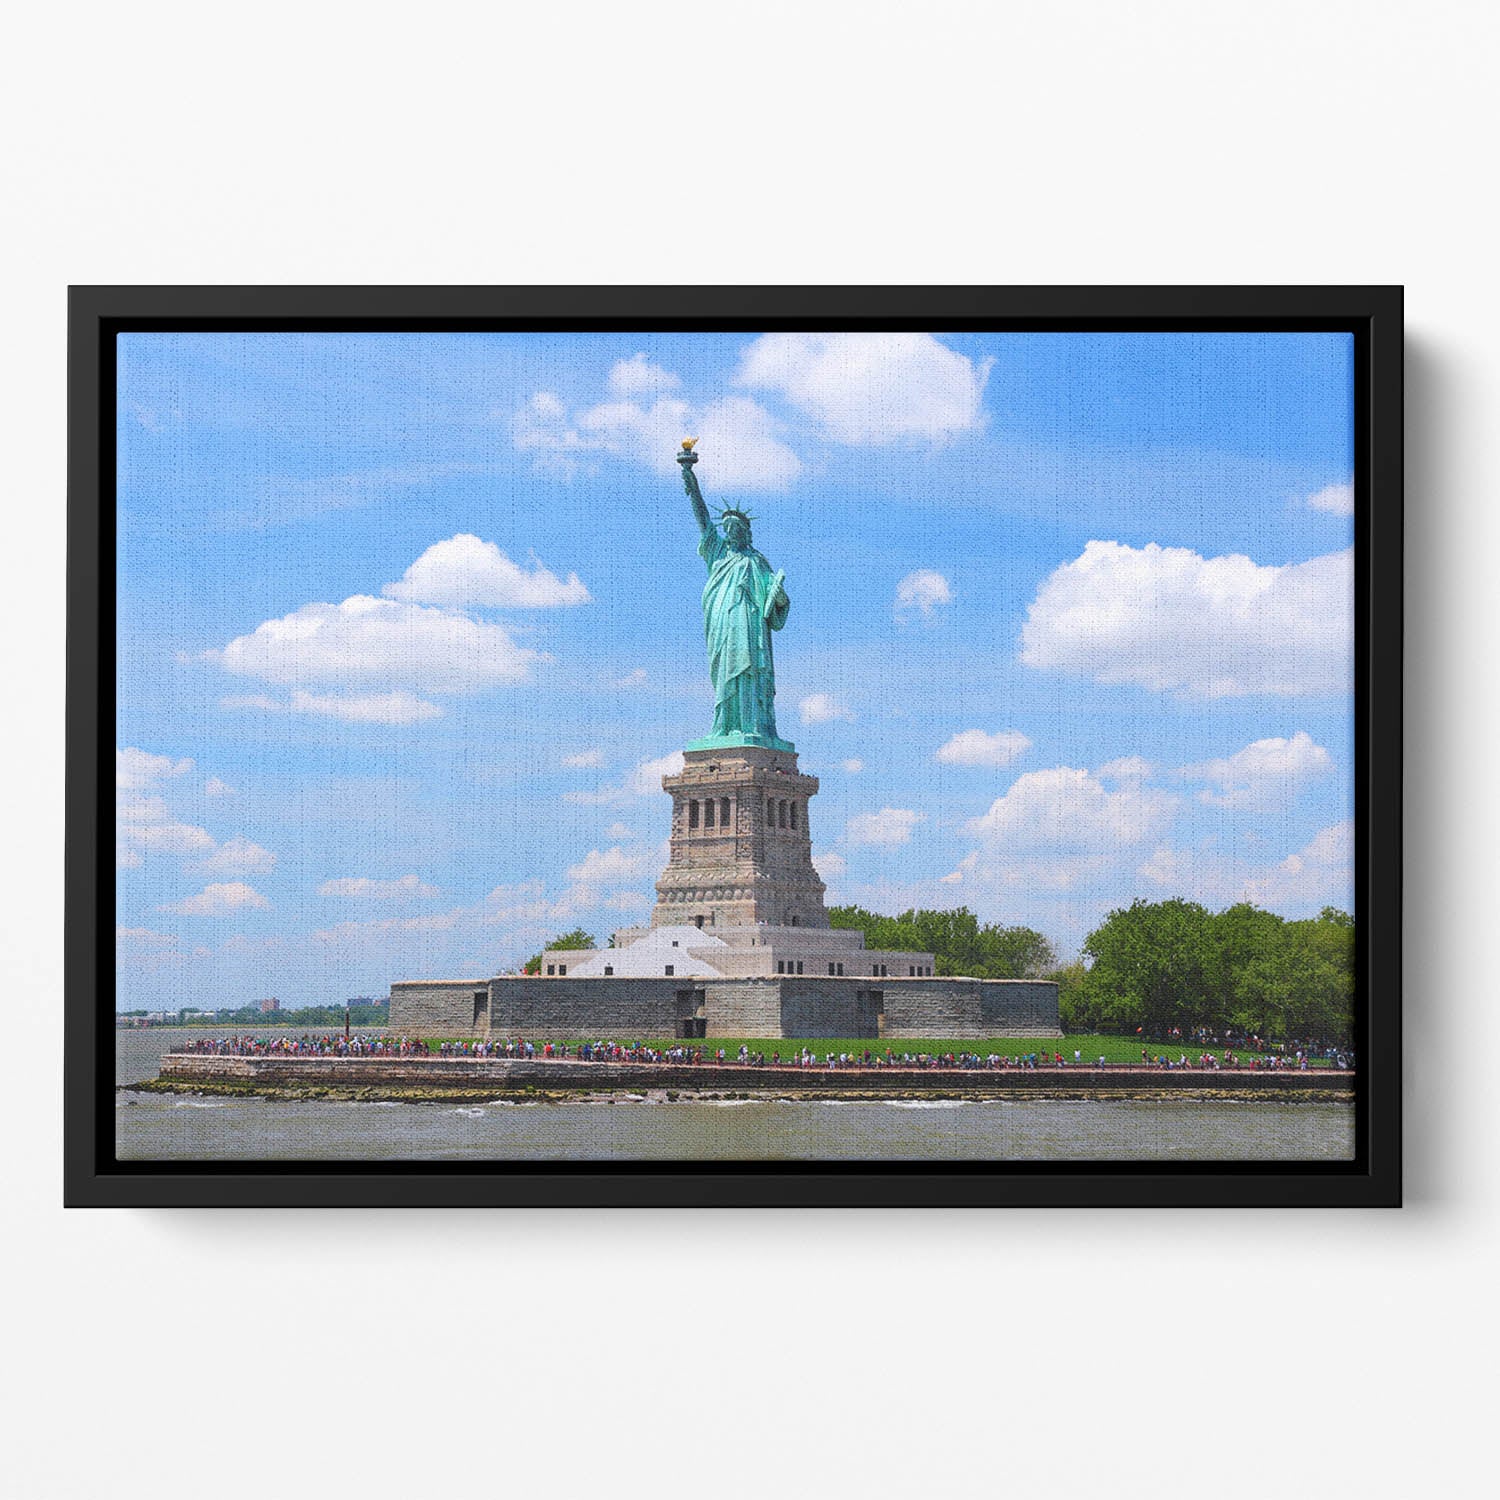 Statue of Liberty Floating Framed Canvas